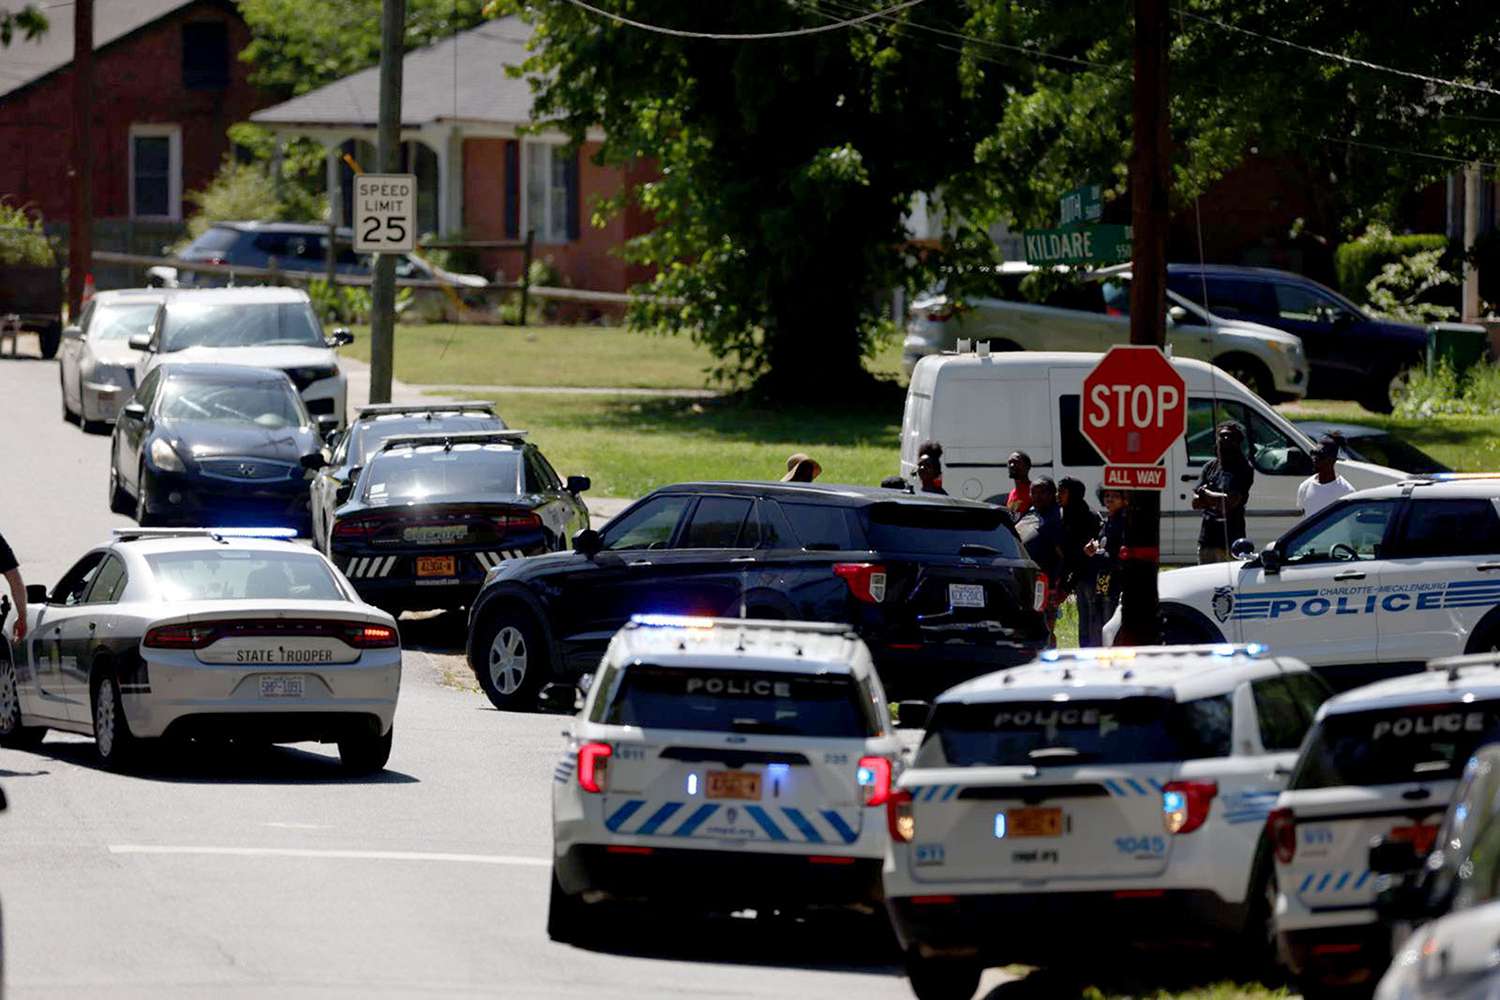 4 Law Enforcement Officers Killed, 4 Wounded While Serving Warrant at North Carolina Home